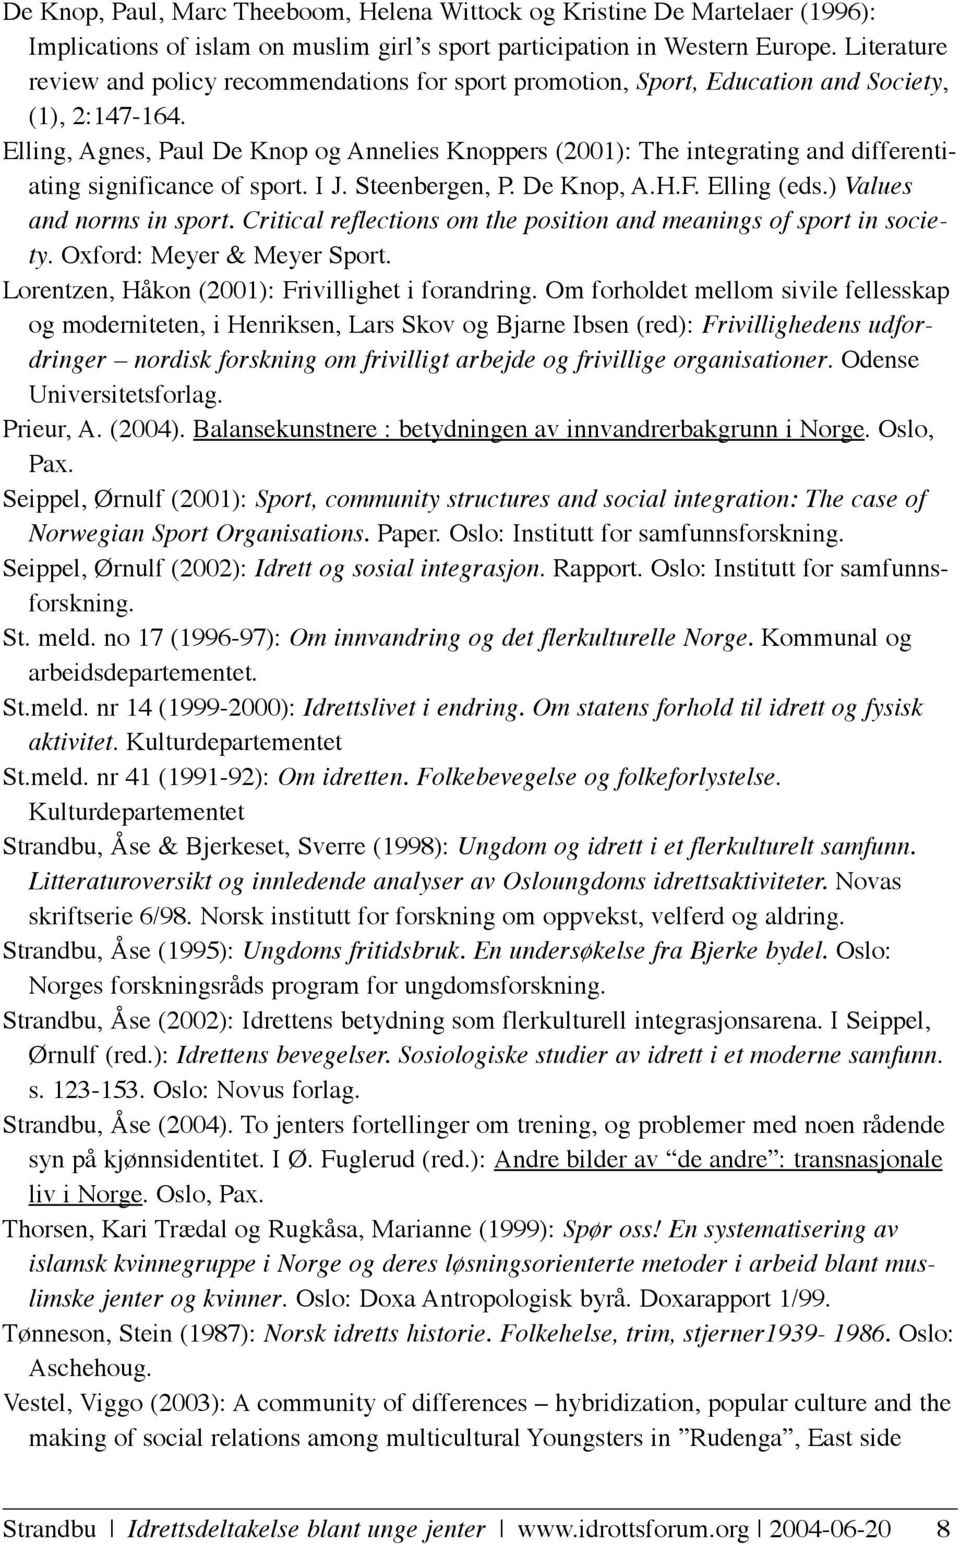 Elling, Agnes, Paul De Knop og Annelies Knoppers (2001): The integrating and differentiating significance of sport. I J. Steenbergen, P. De Knop, A.H.F. Elling (eds.) Values and norms in sport.